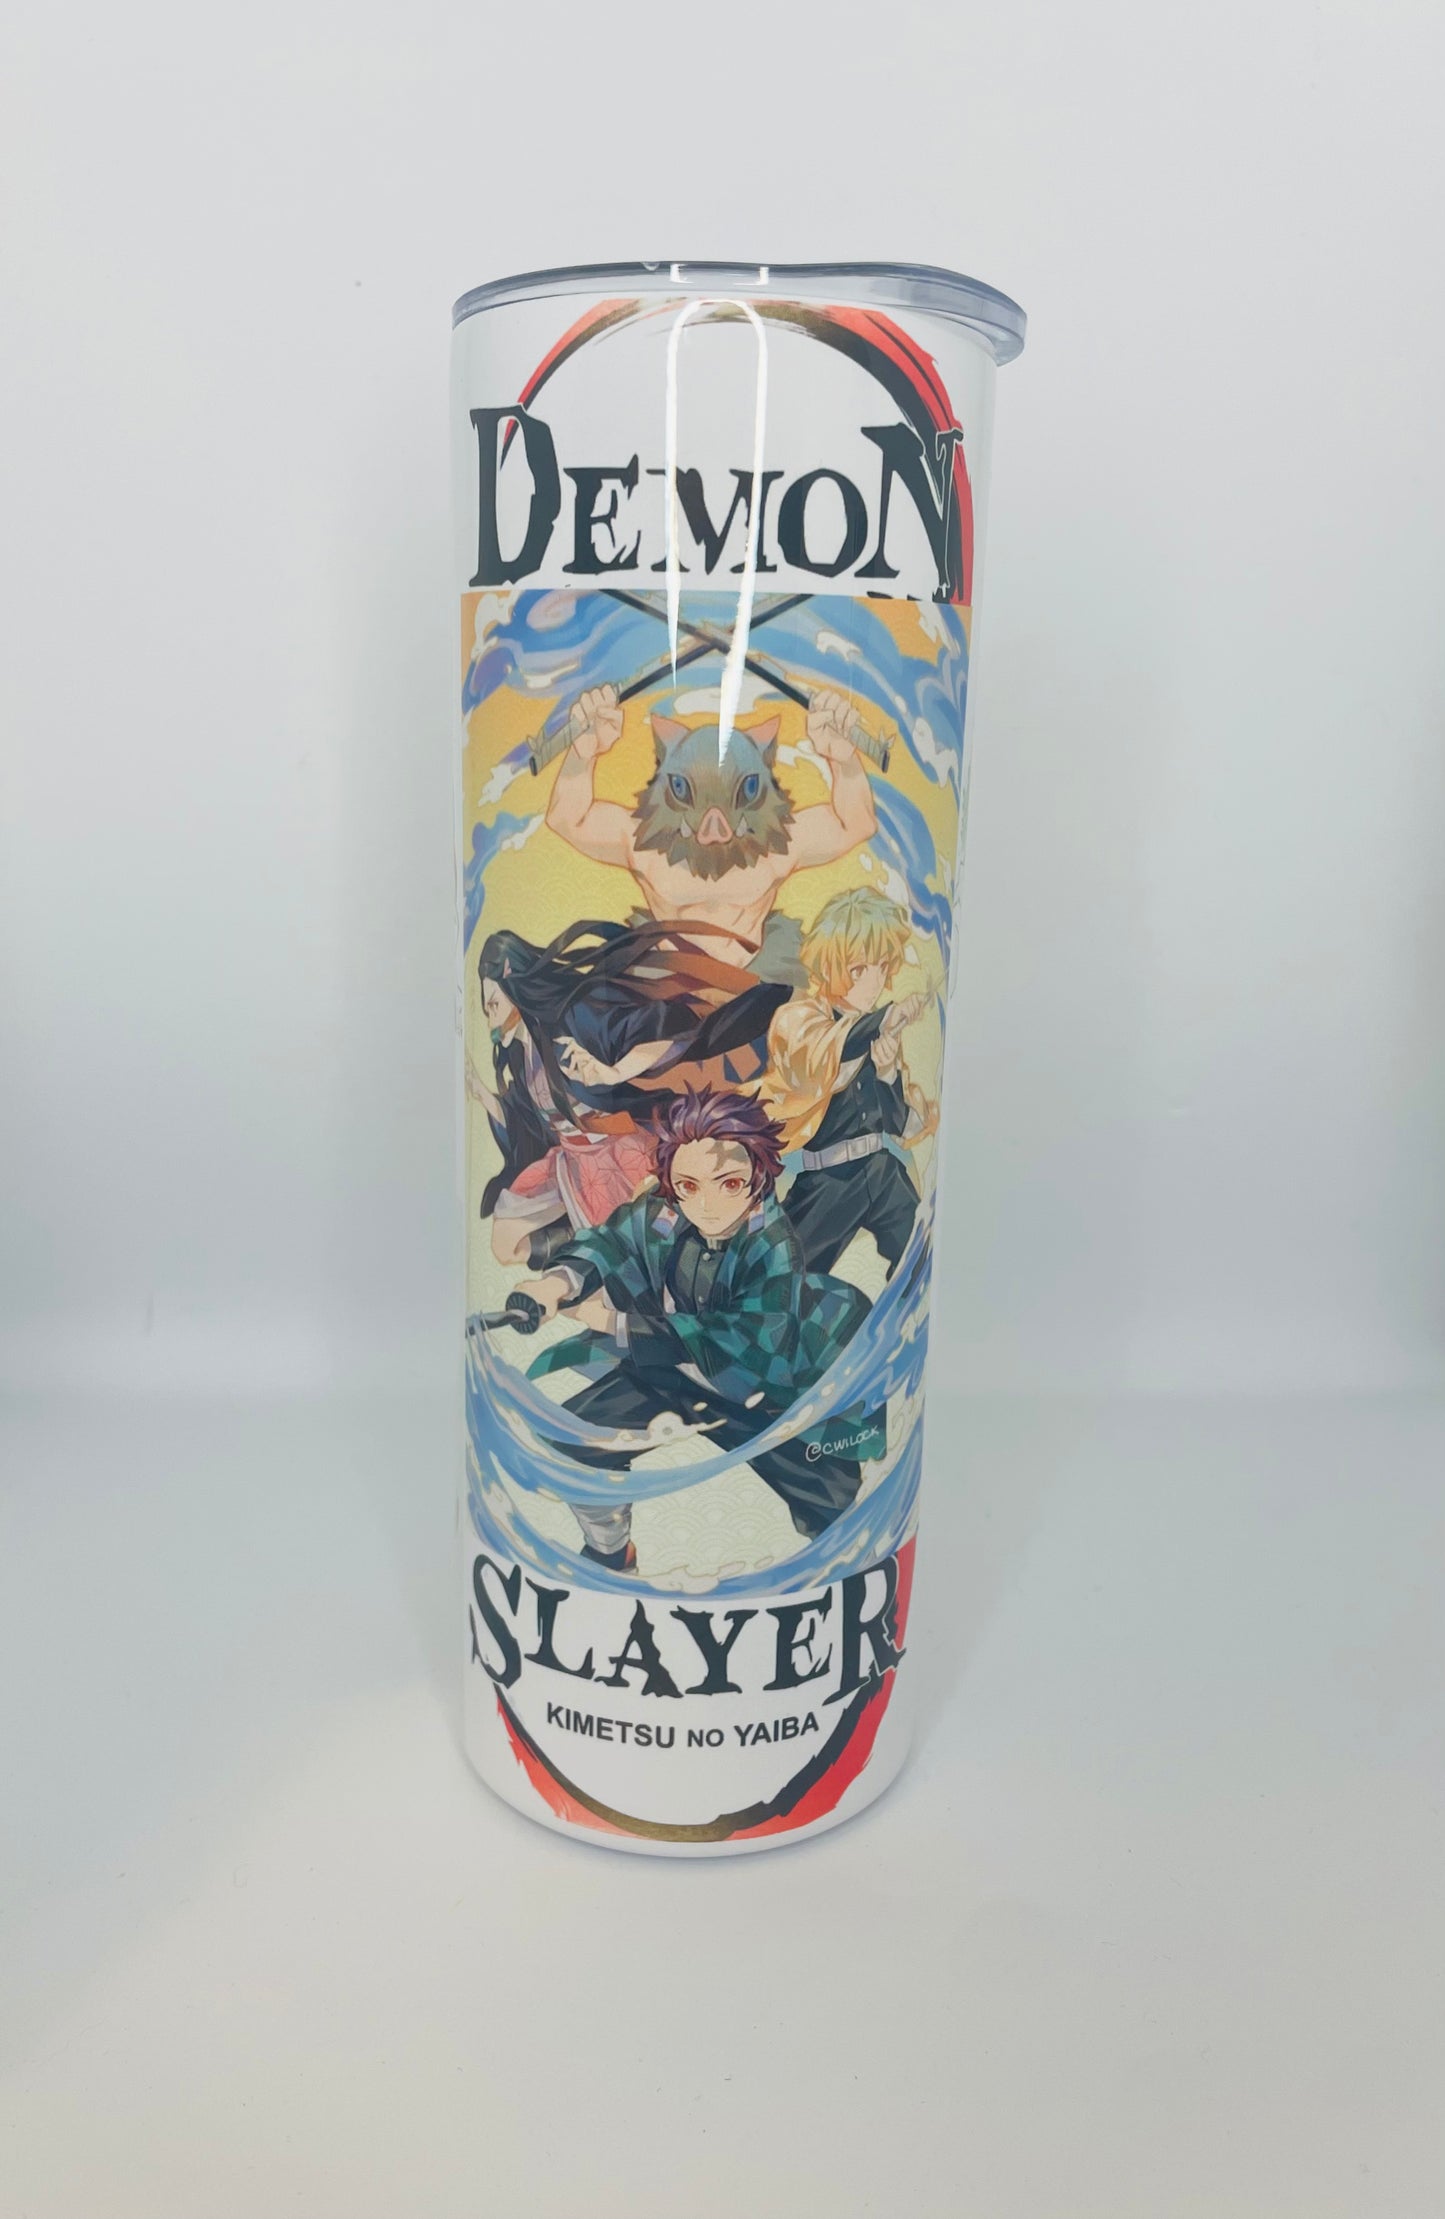 Personalized Tumblers, Personalized Cups, Anime, Demon Slayer, Demon Slayer Customized Tumblers, Demon Slayer Cup, Coffee Cups, Tumblers, Unique Gifts, Personalized Gifts